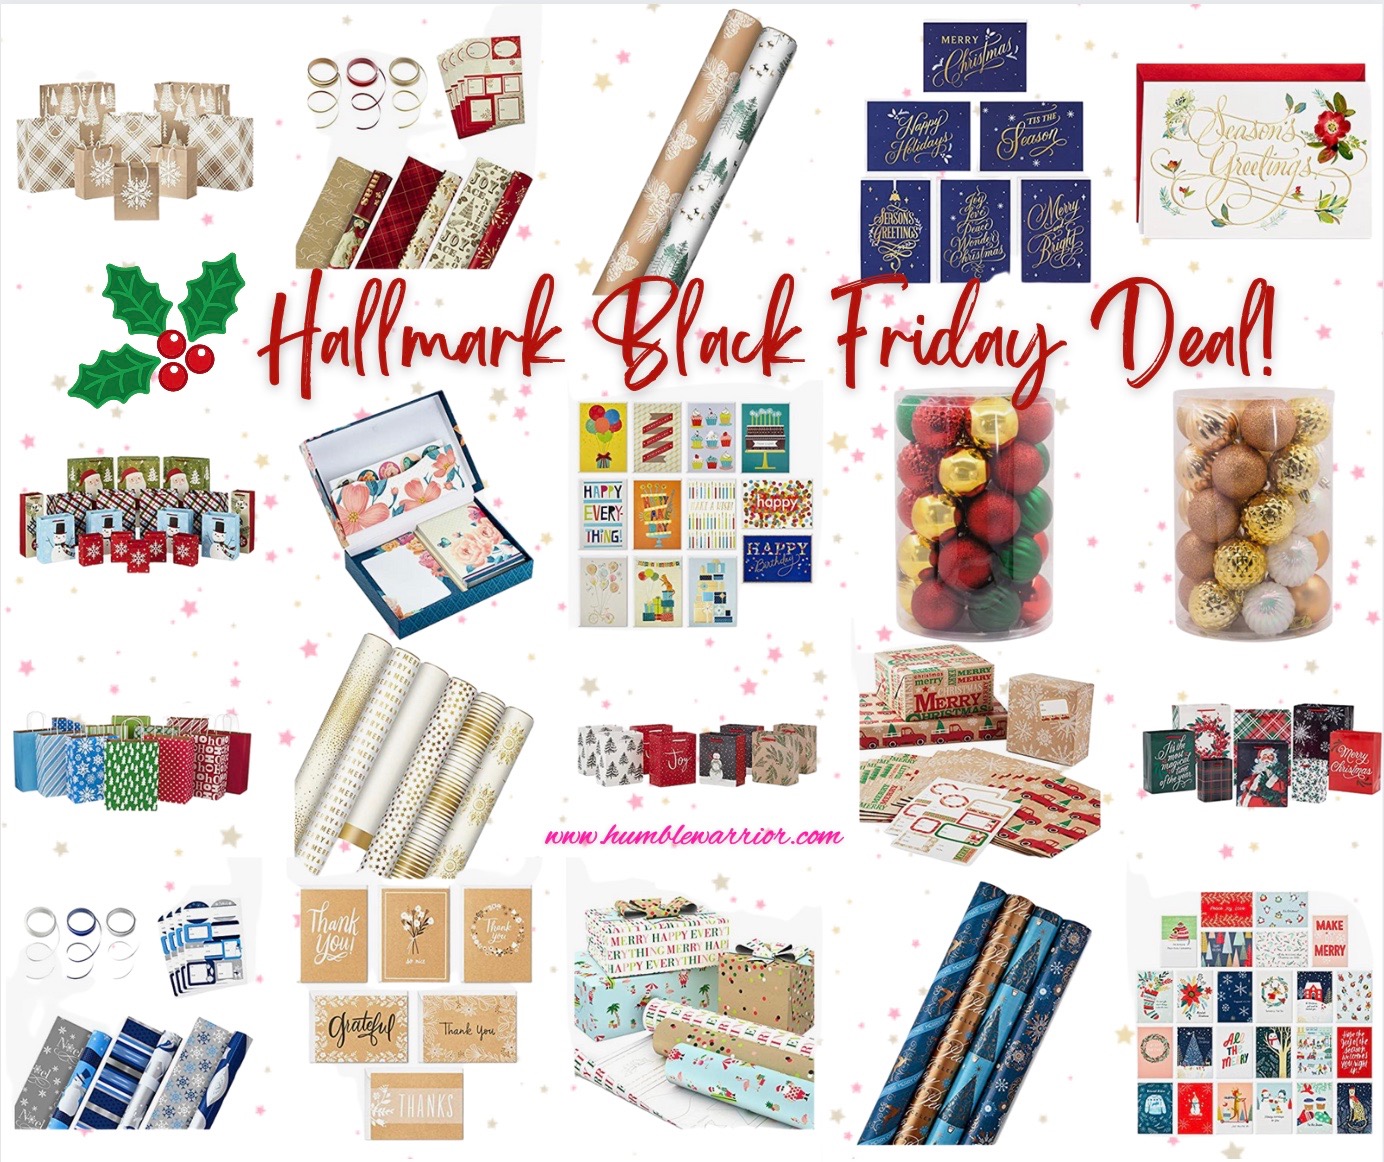 Hallmark Black Friday Deal! Home of The Humble Warrior